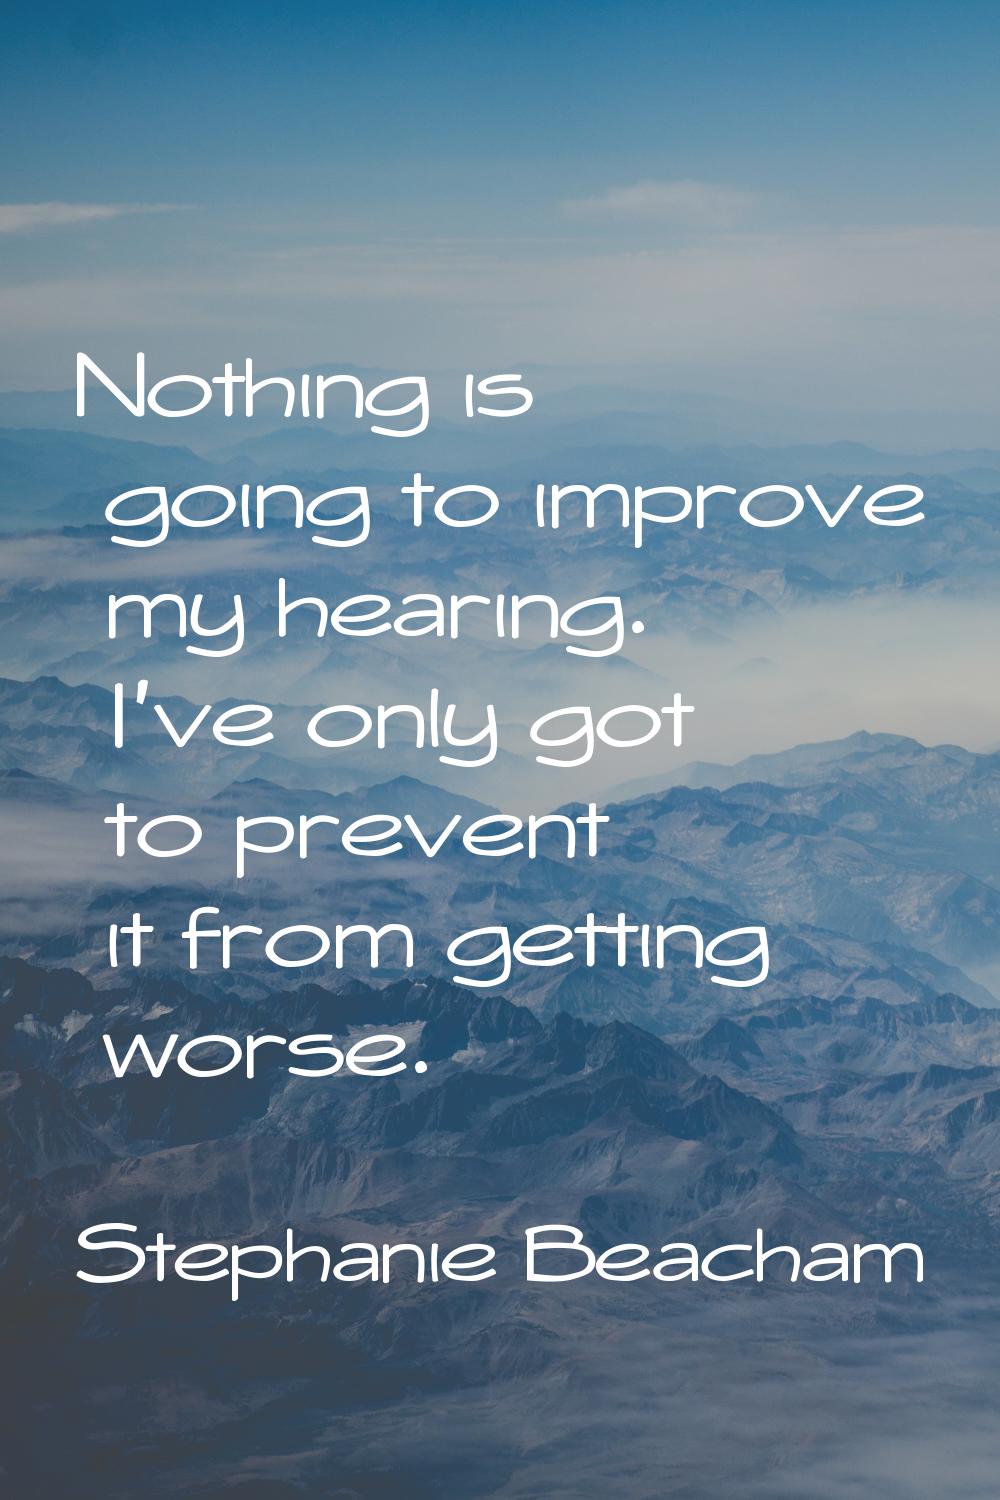 Nothing is going to improve my hearing. I've only got to prevent it from getting worse.